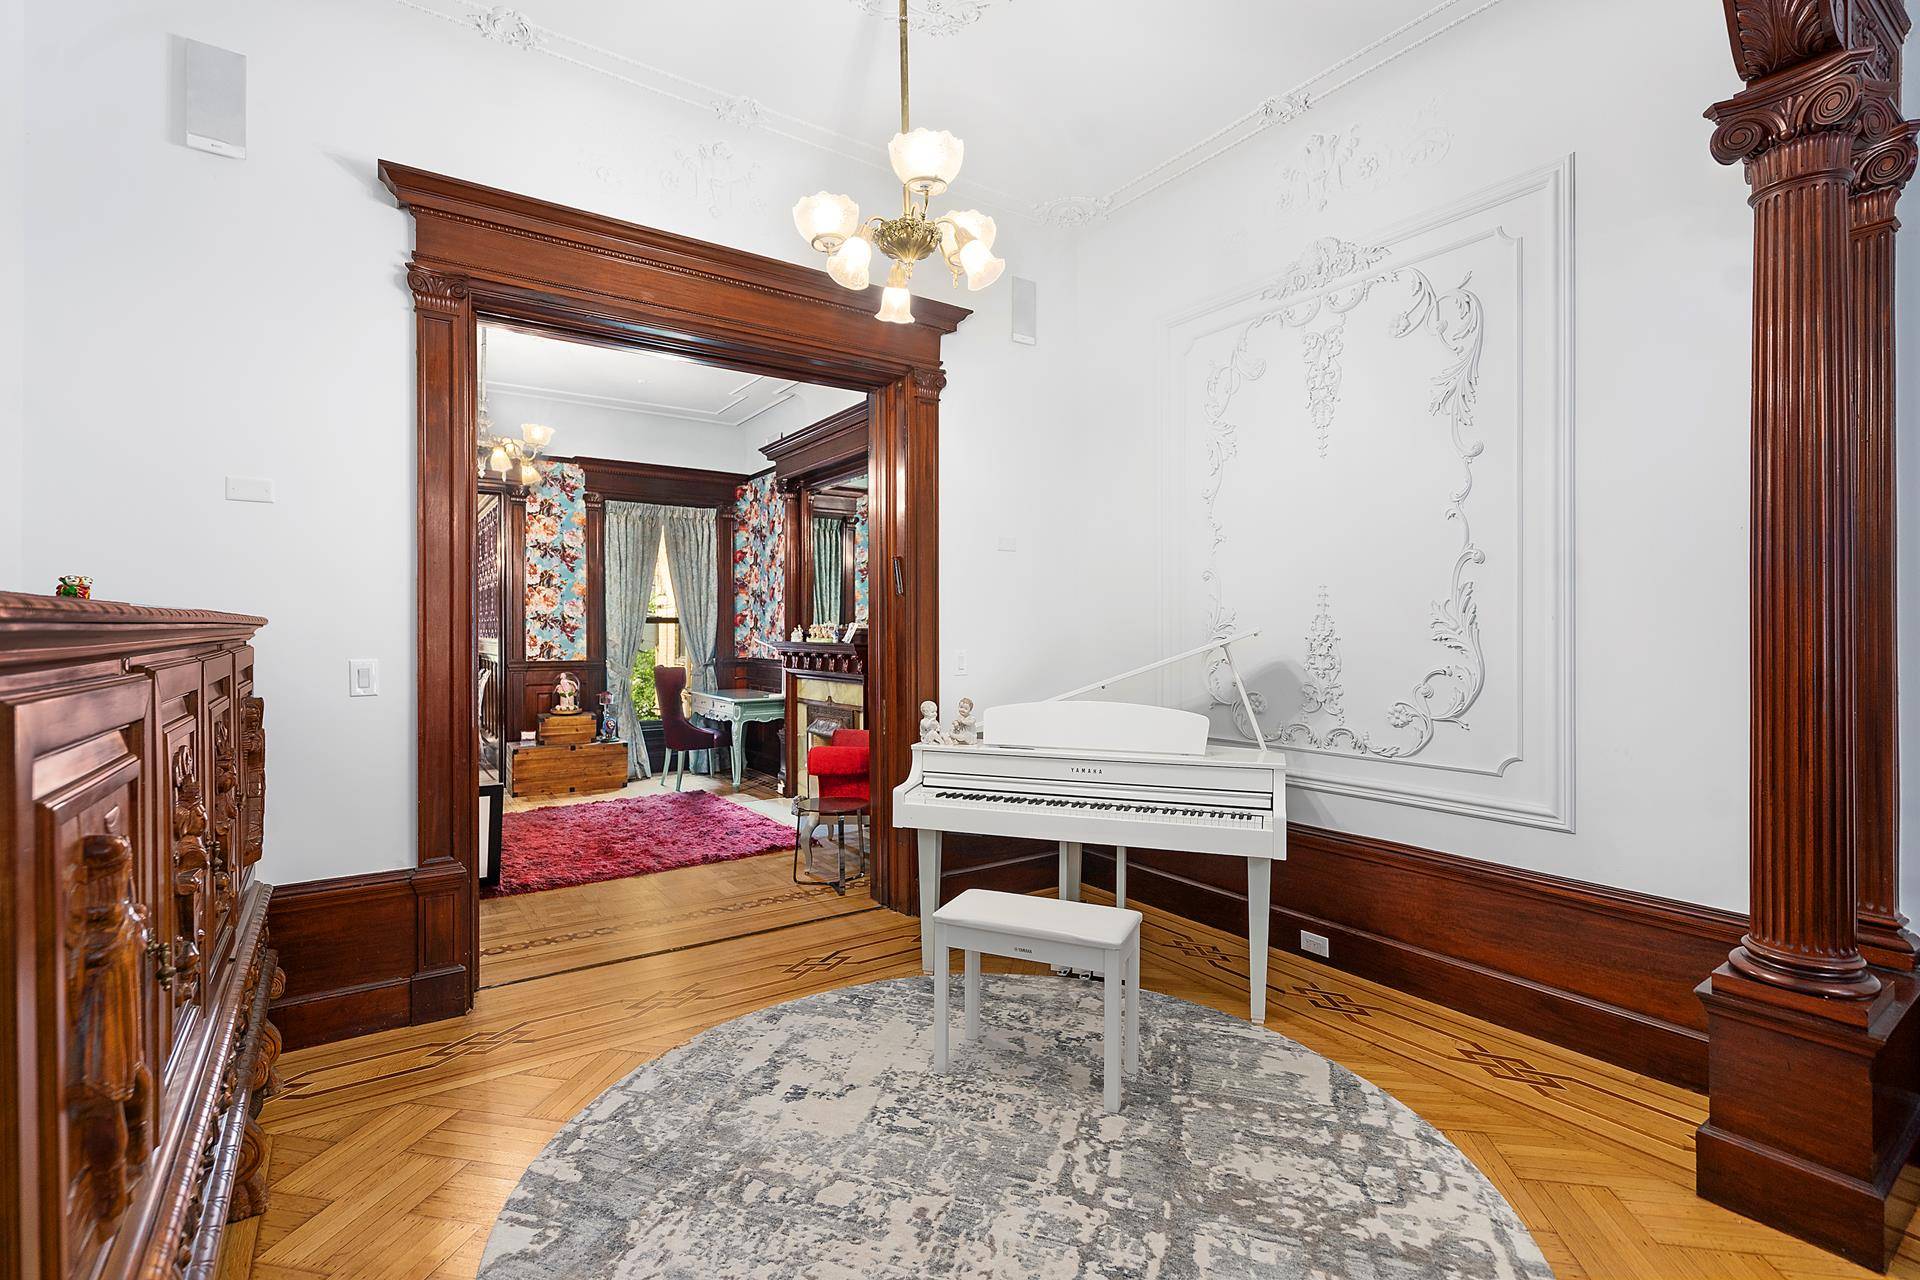 Grand scale five story brownstone in a prestige parkside address, a new benchmark for sophisticated brownstone living lies beyond the striking character frontage of this historic five story c1901 mansion.